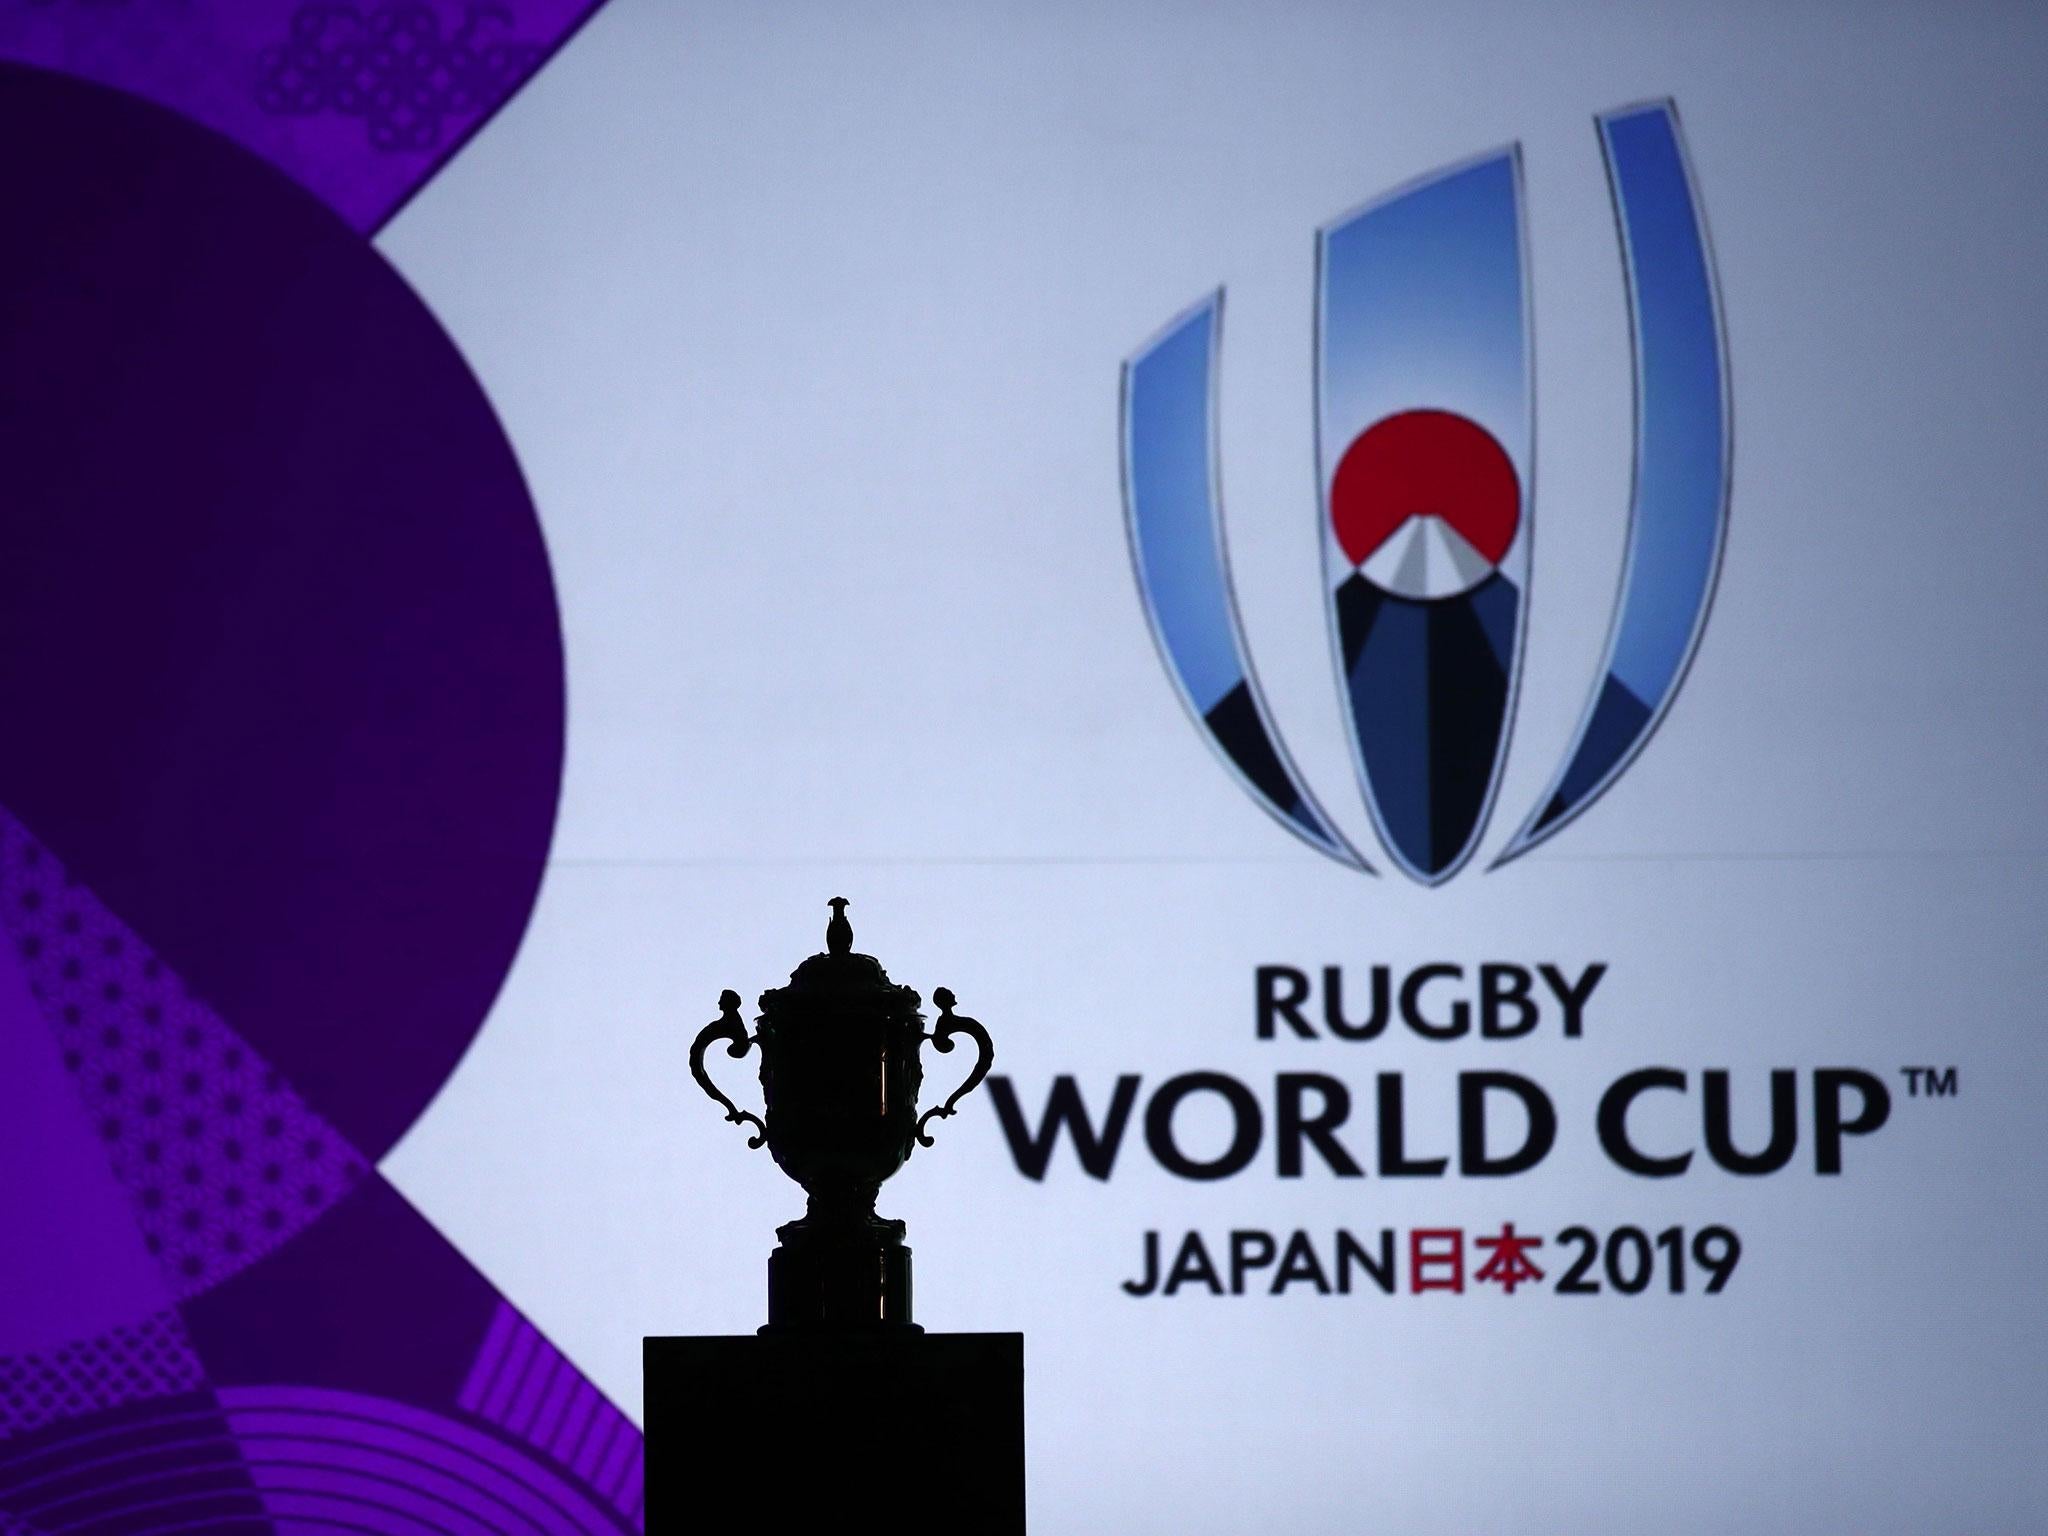 The Rugby World Cup will headline a blockbuster year for the sport in 2019